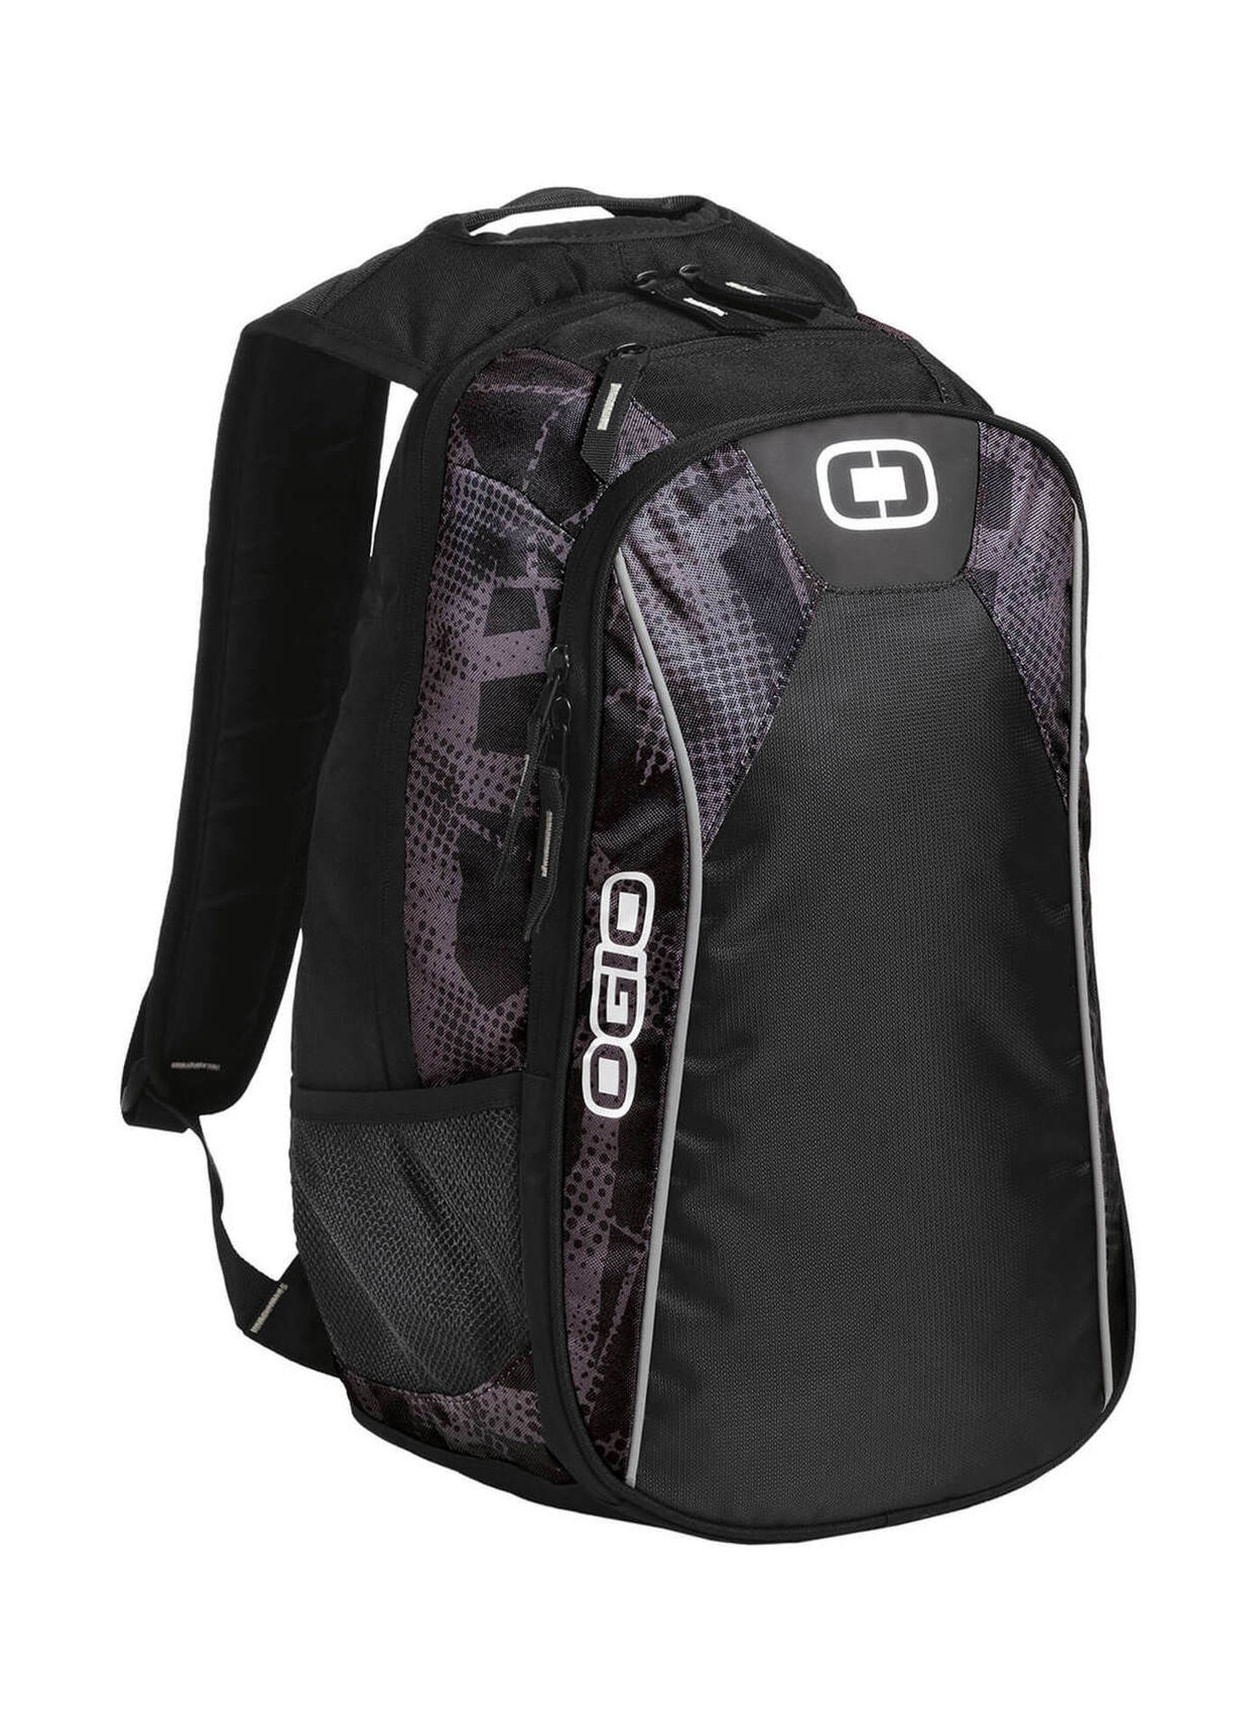 OGIO Fracture Marshall Backpack